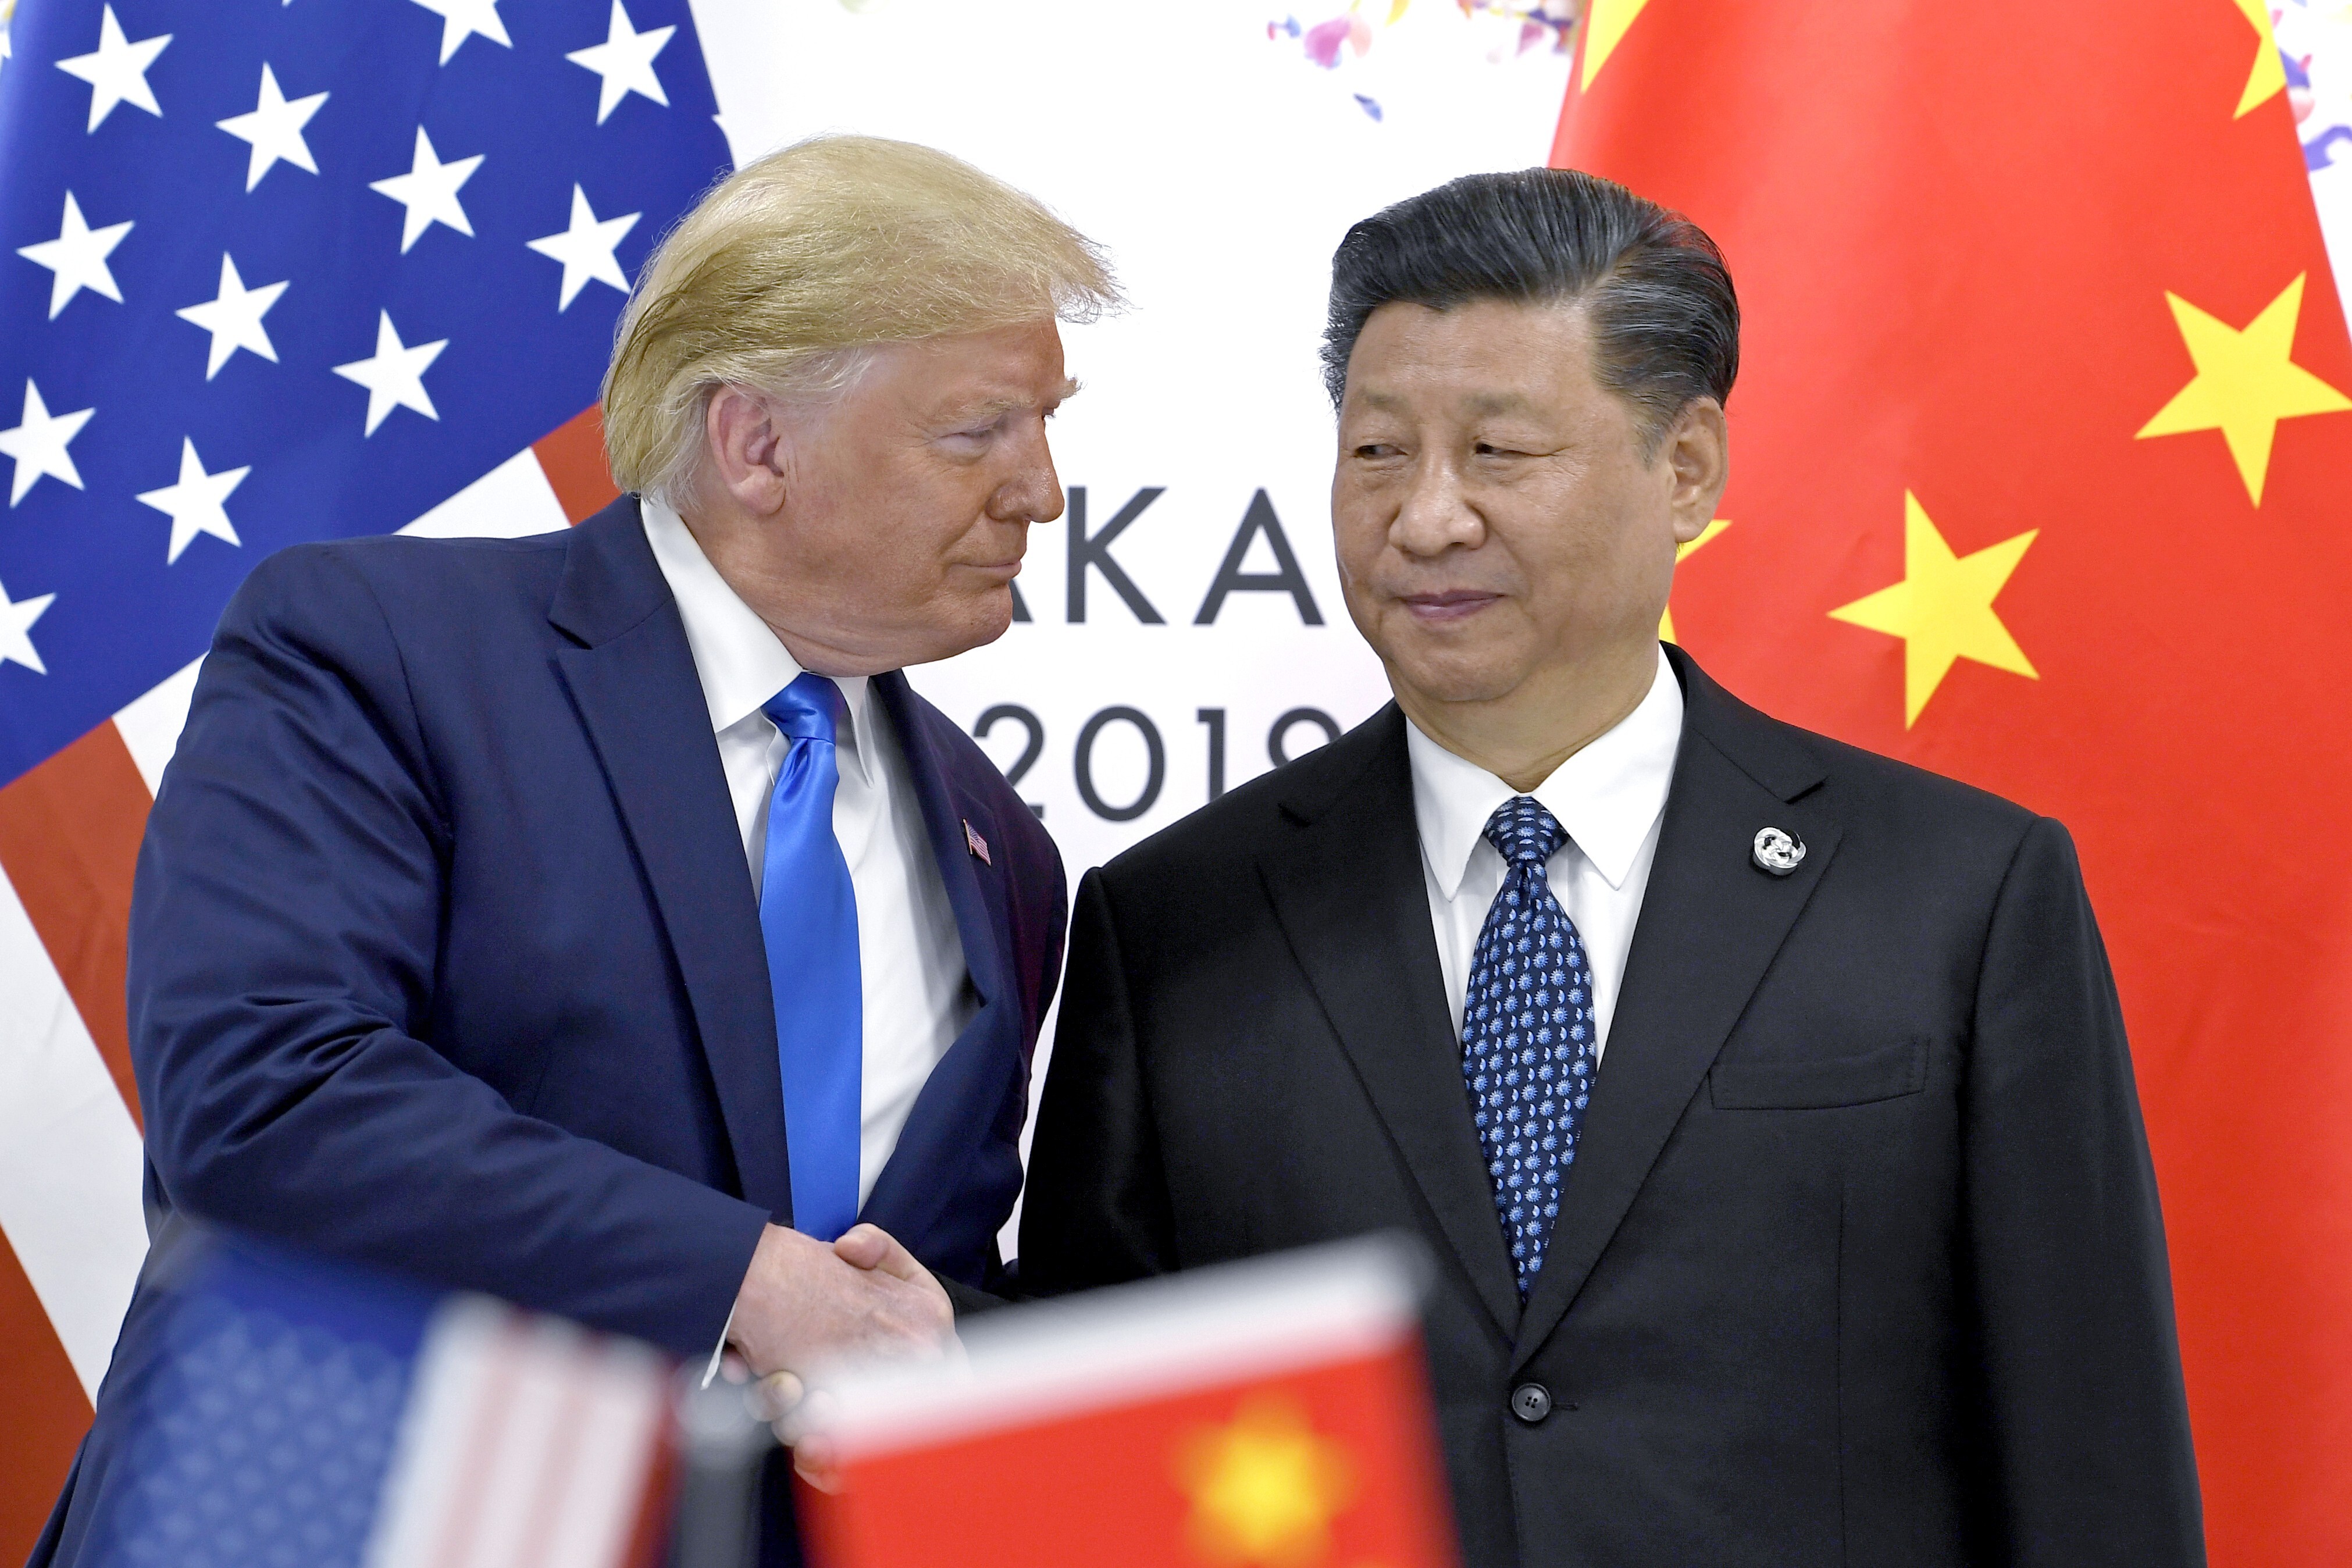 US President Donald Trump shakes hands with President Xi Jinping during a meeting on the sidelines of the Group of 20 summit in Osaka, Japan, on June 29, 2019. The phase one trade deal Trump secured after years of confrontational, tariff-focused dealings with China has yet to live up to its promises. Photo: AP